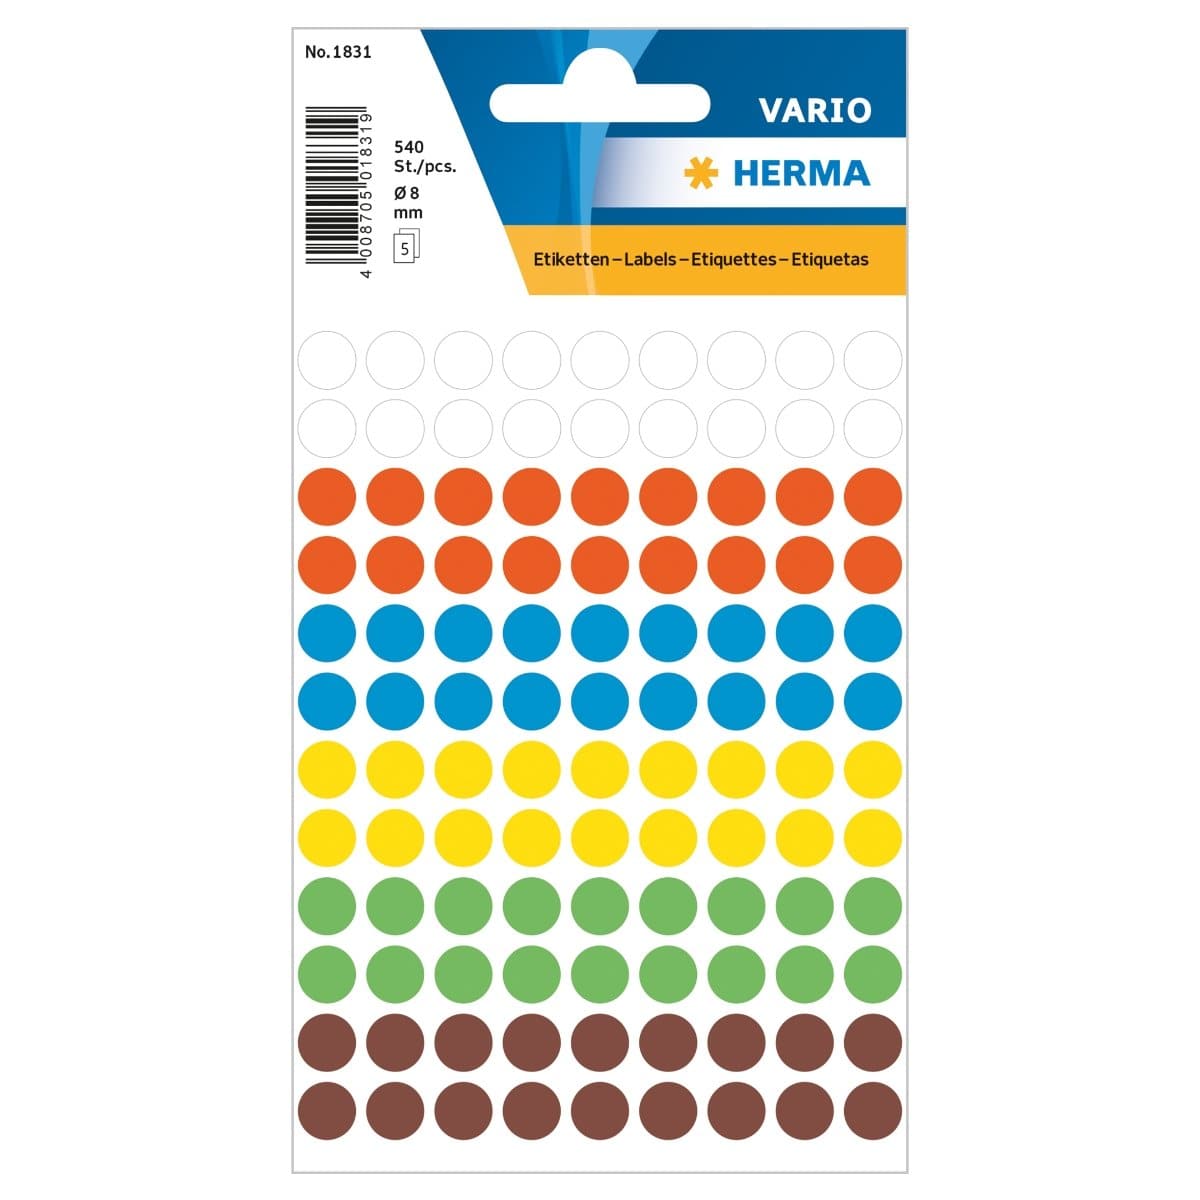 Herma Vario Sticker Color Dots, 8 mm, 540/pack, Assorted Colors